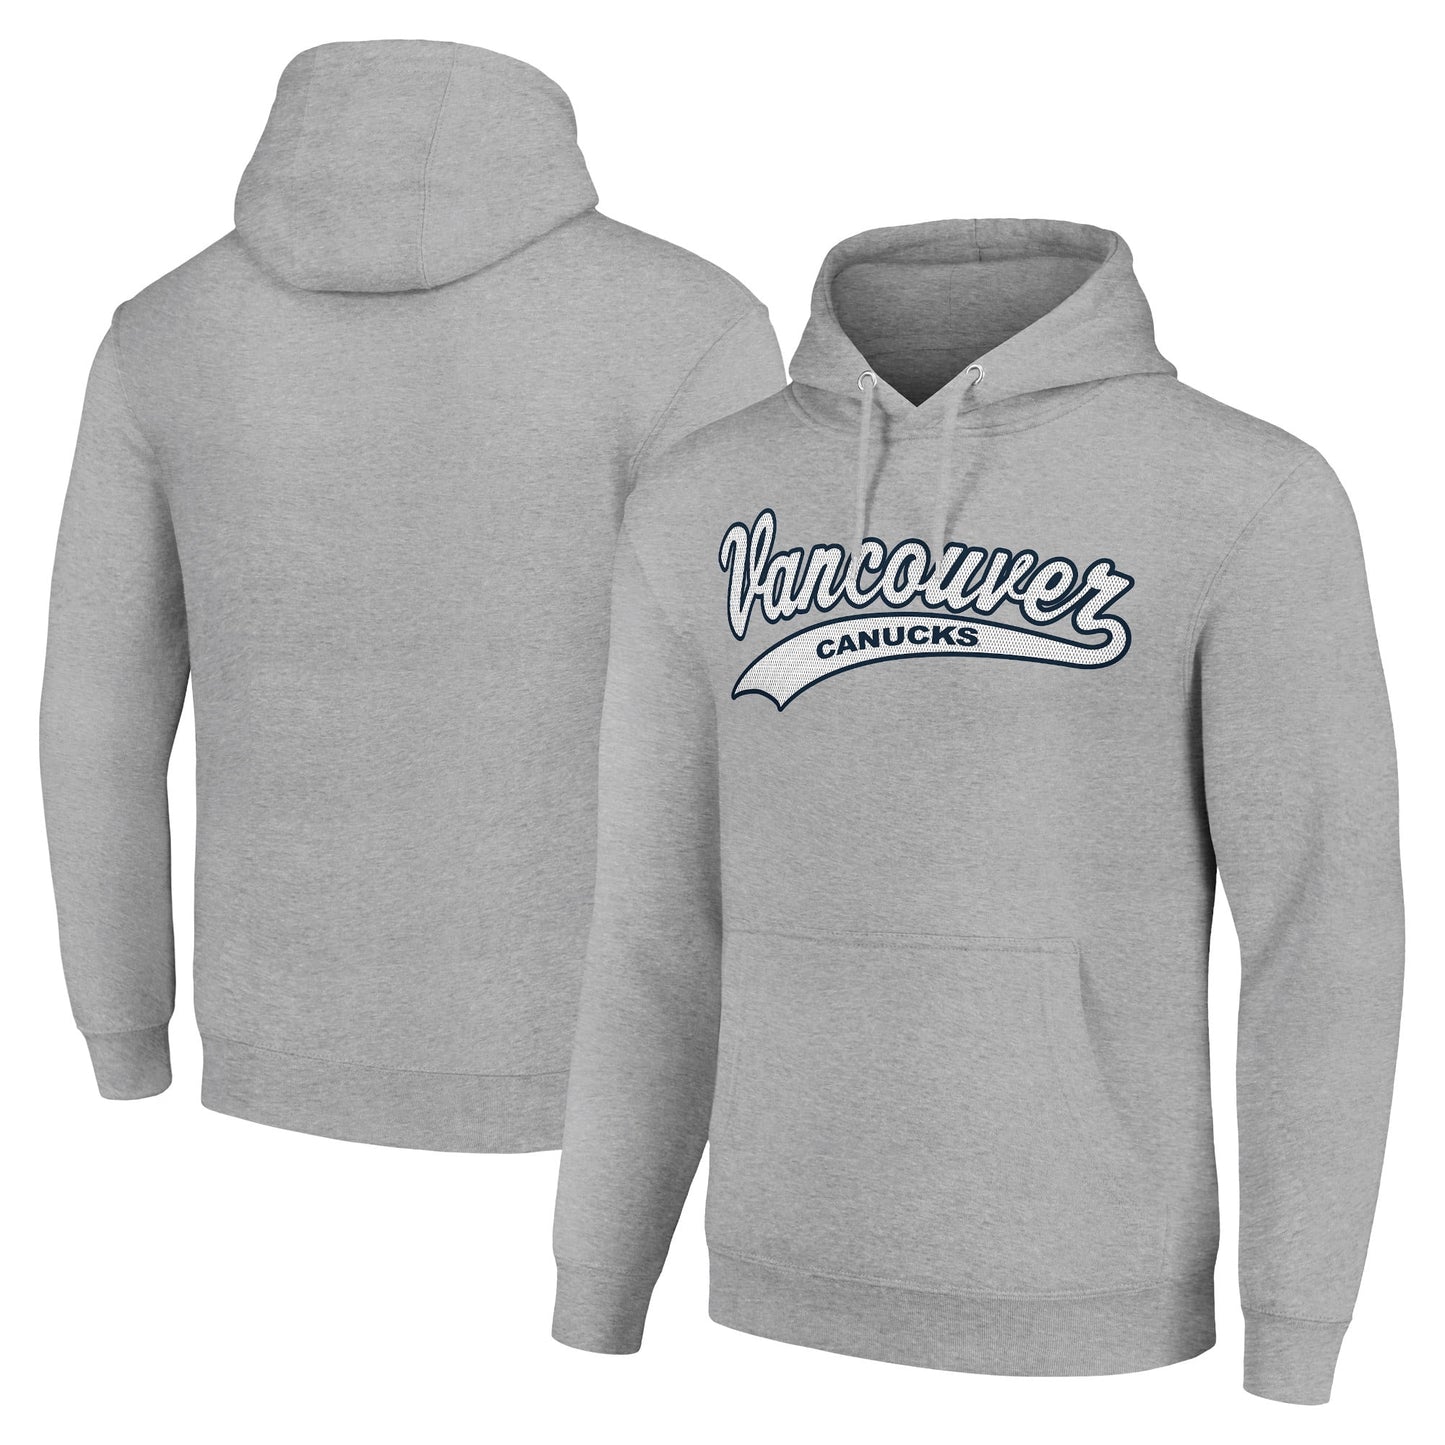 Men's Starter Heather Gray Vancouver Canucks Tailsweep Fleece Tri-Blend Pullover Hoodie